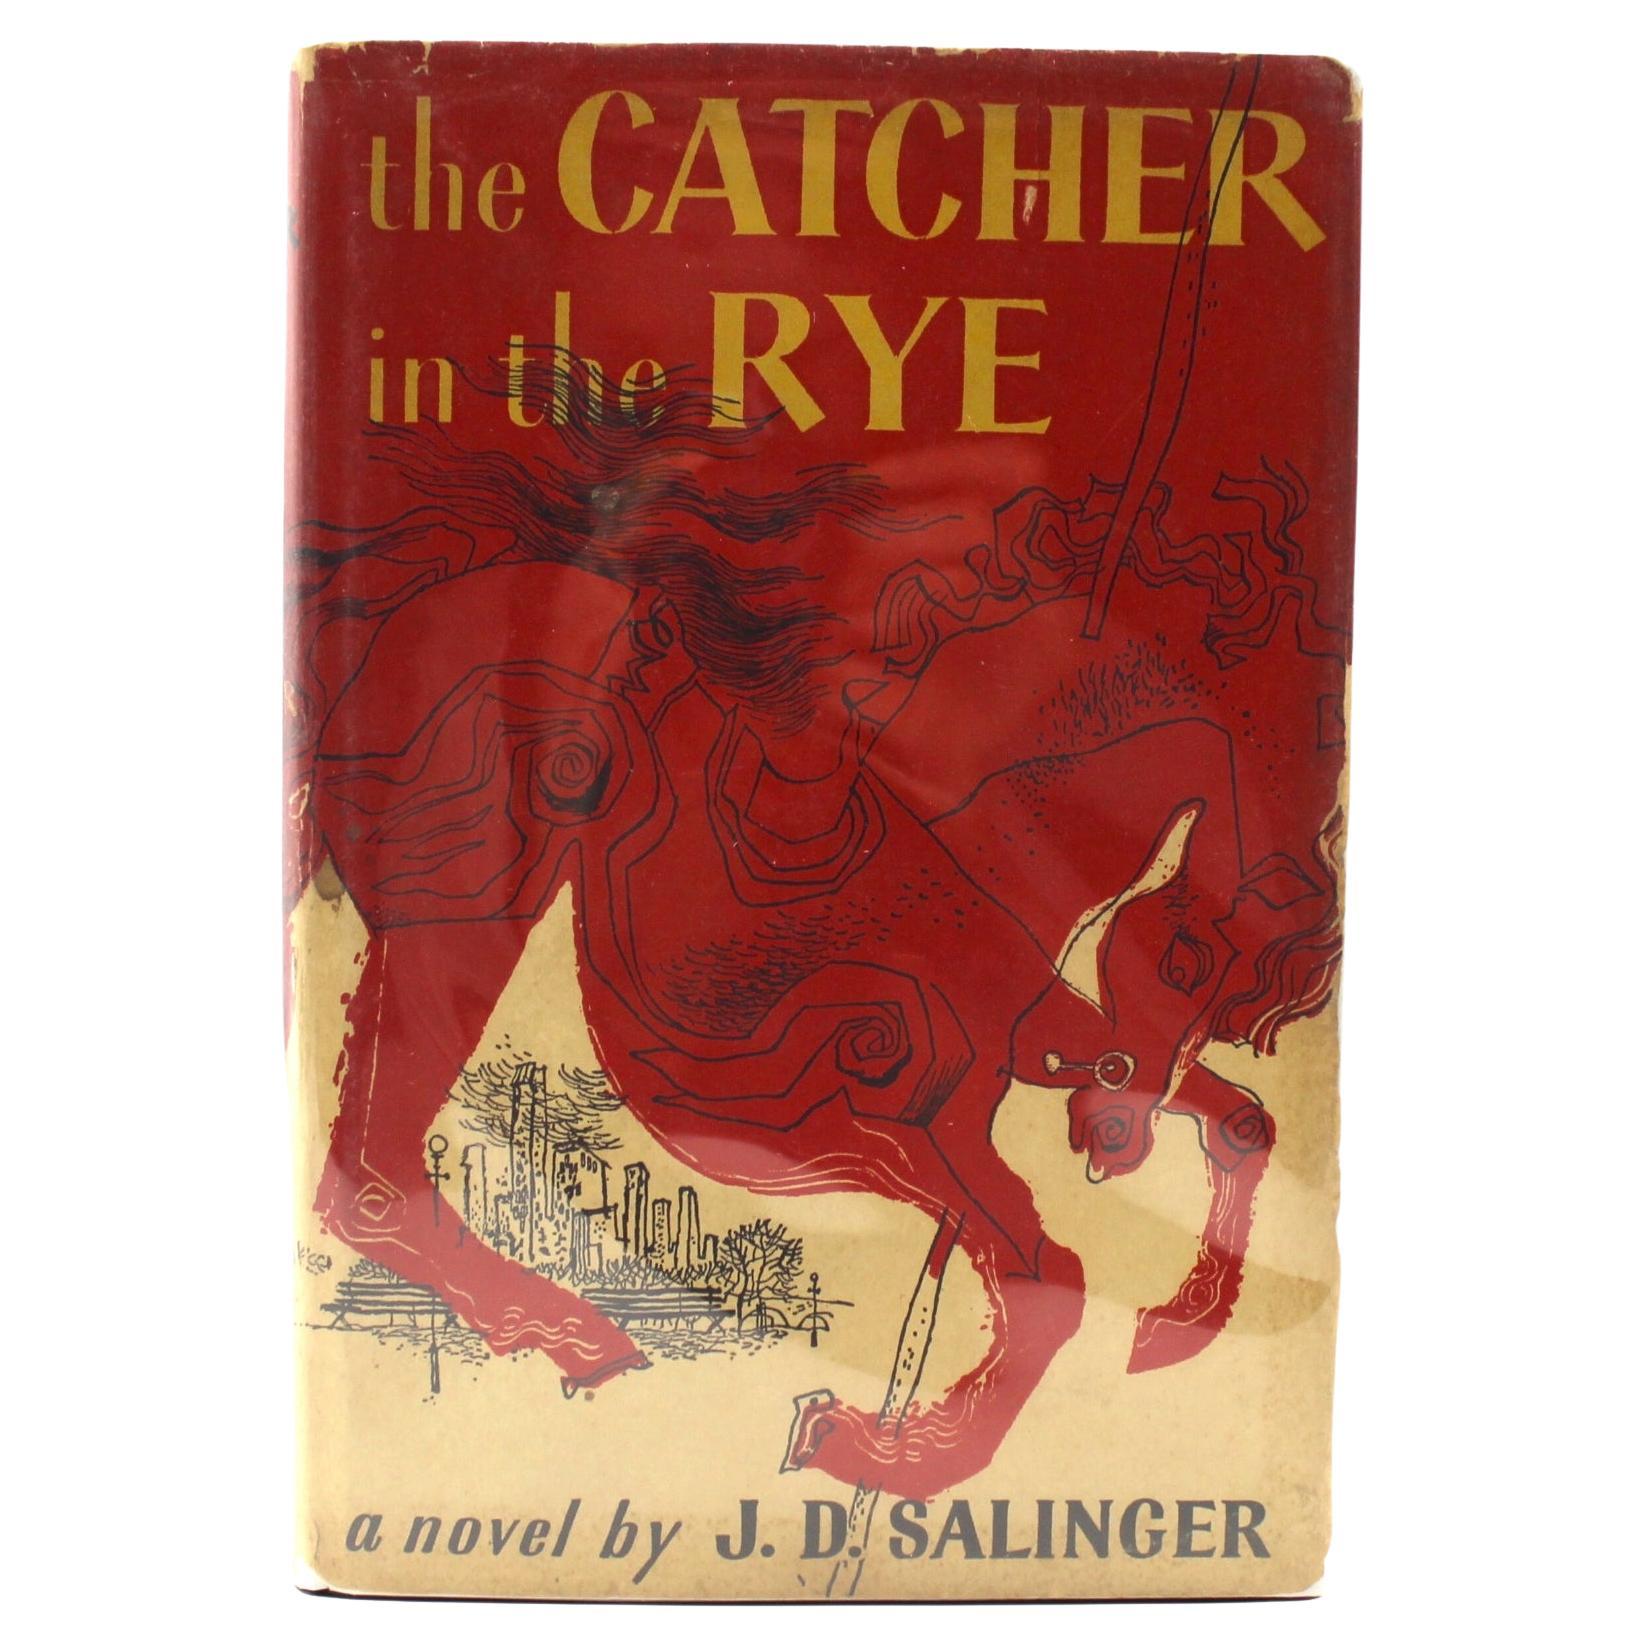 Salinger, J. D. The Catcher in the Rye. Boston: Little, Brown and Company, 1951. First edition, first issue. Octavo. In the original publisher’s black cloth boards, with gilt titles to the spine. In the original publisher’s first issue dust jacket.